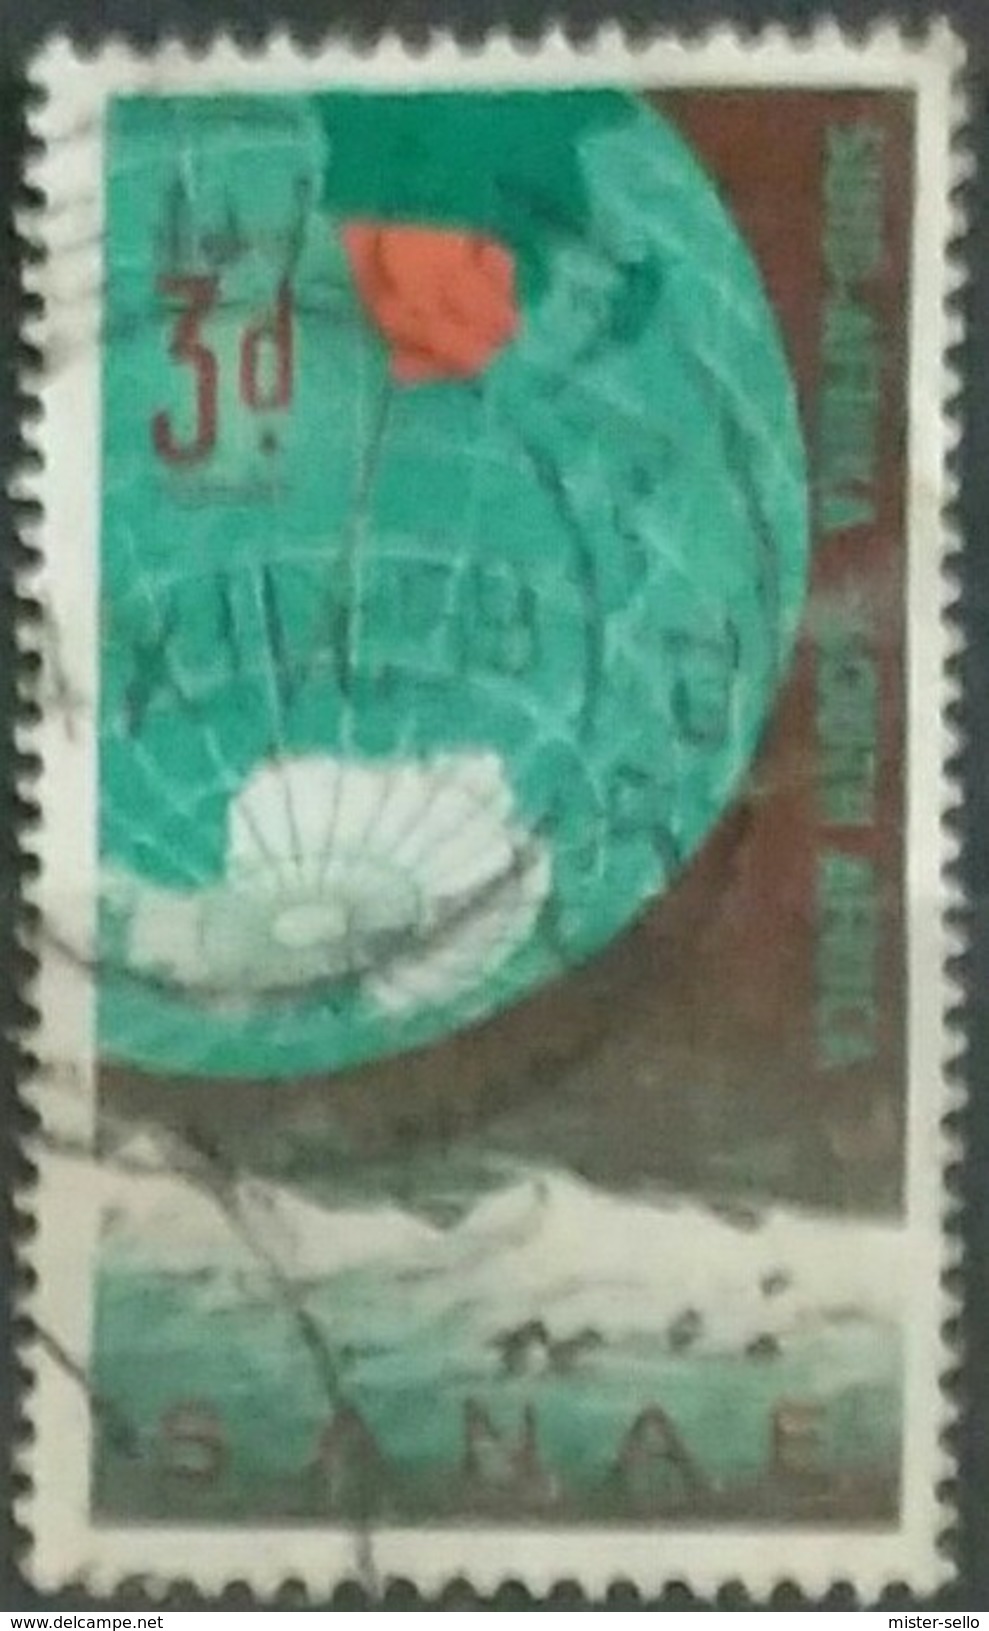 SUDAFRICA - AFRICA DEL SUR 1959 South African National Antarctic Expedition. USAD - USED. - Usados